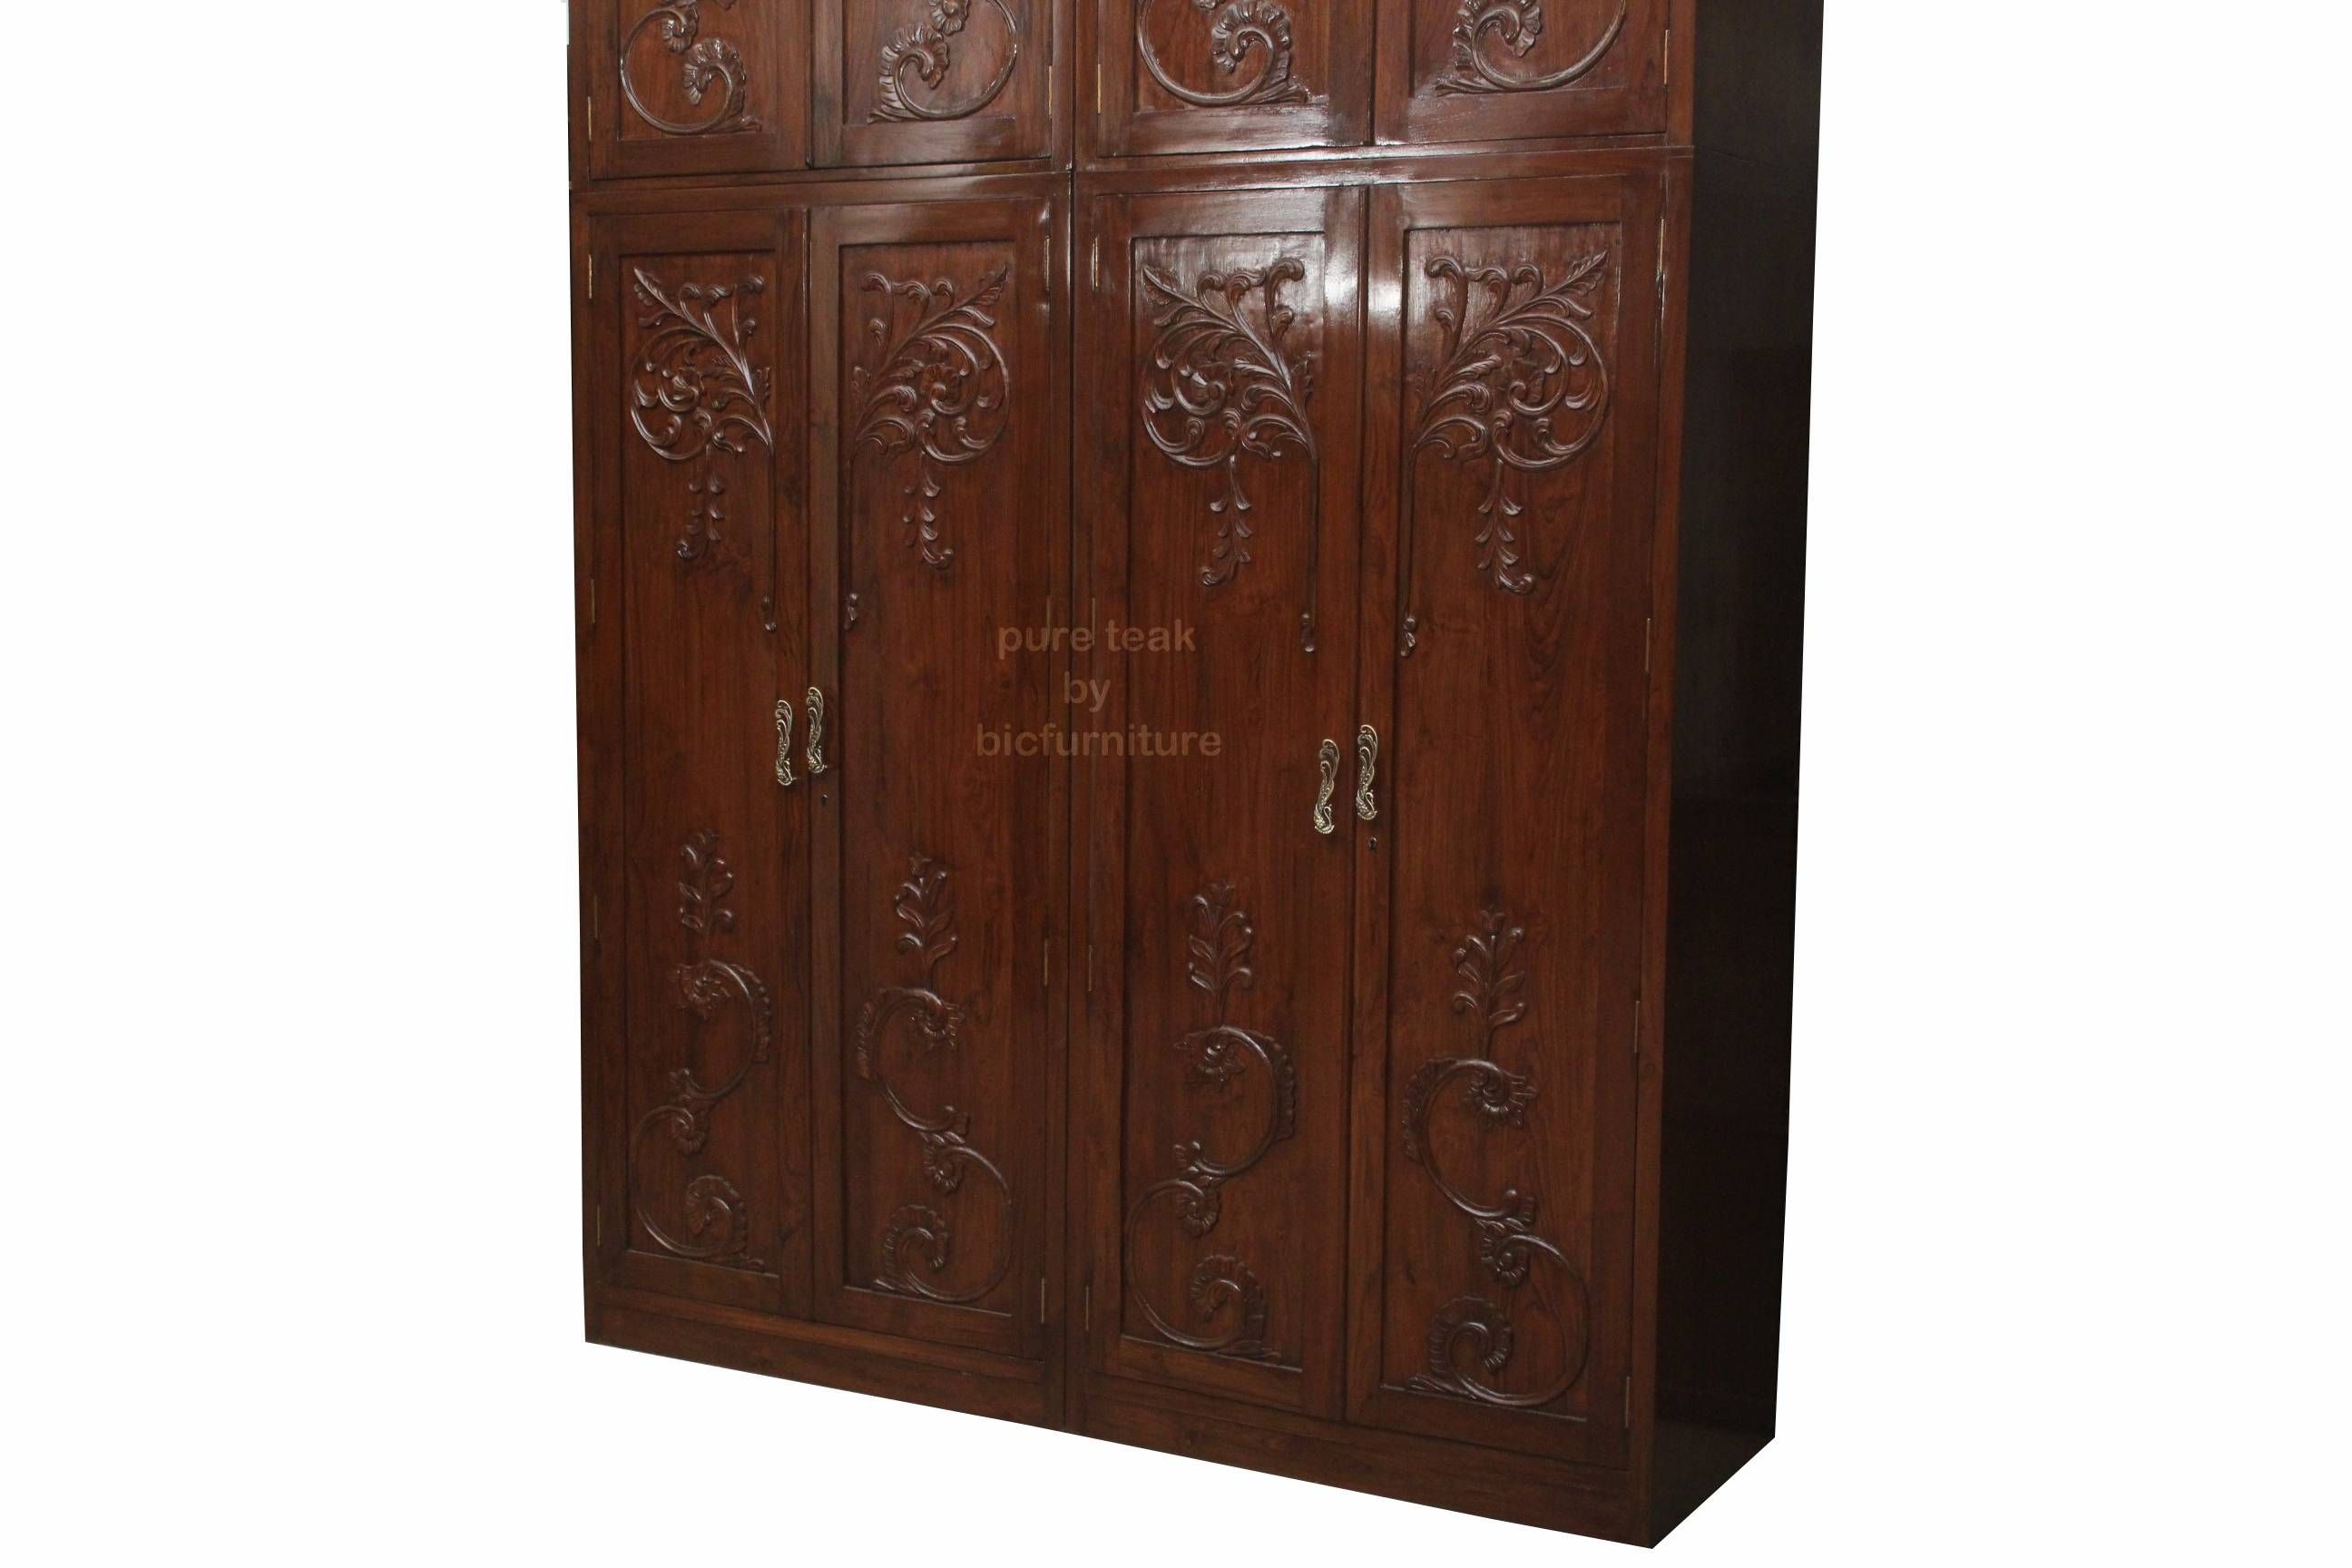 Wb 140 Teakwood Wardrobe With Carving Design Details | Bic Pertaining To Wooden Wardrobes (View 15 of 15)